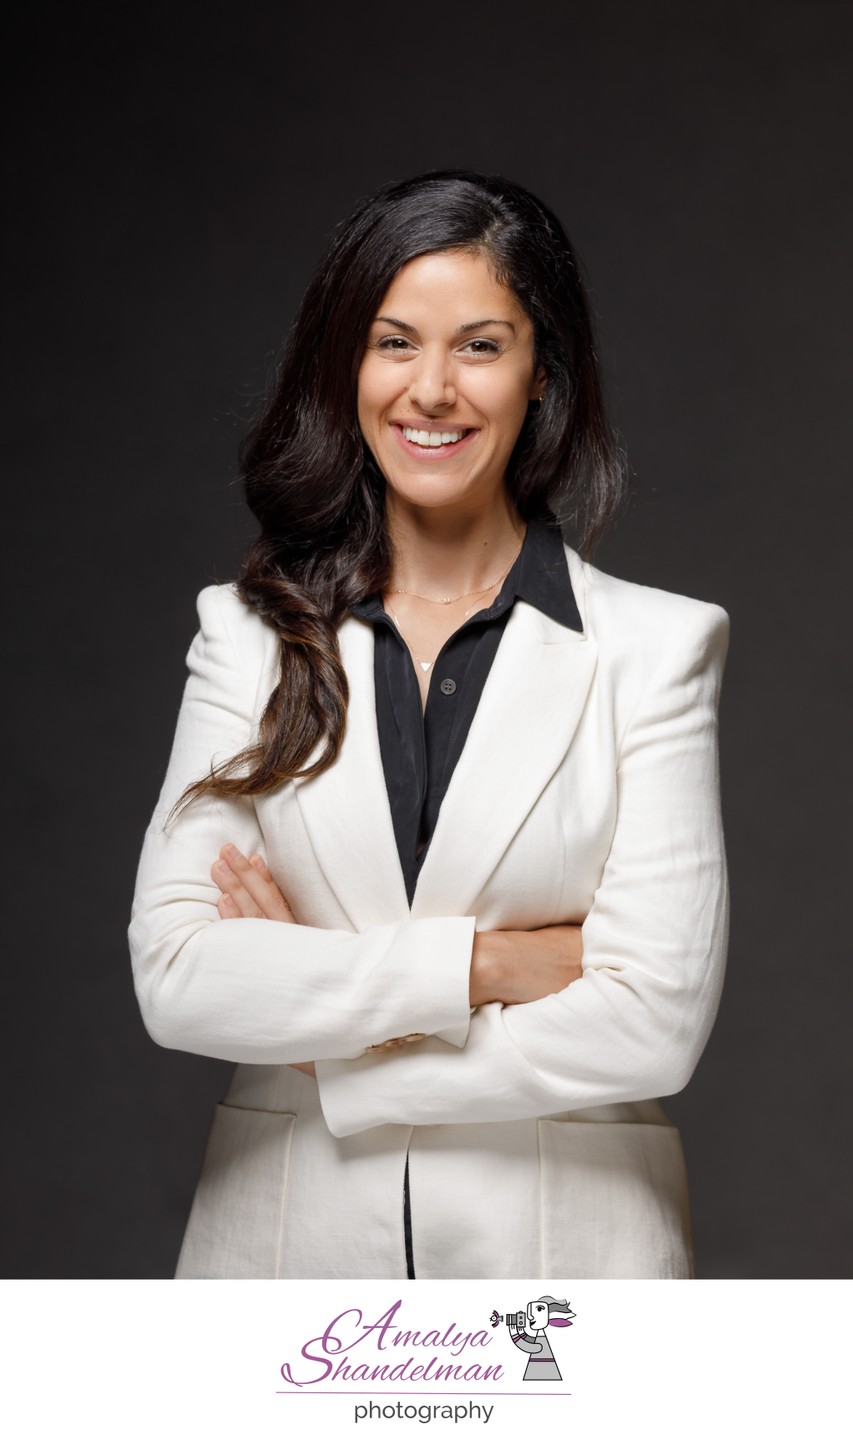 Businesswoman with a Smile: Professional Portrait